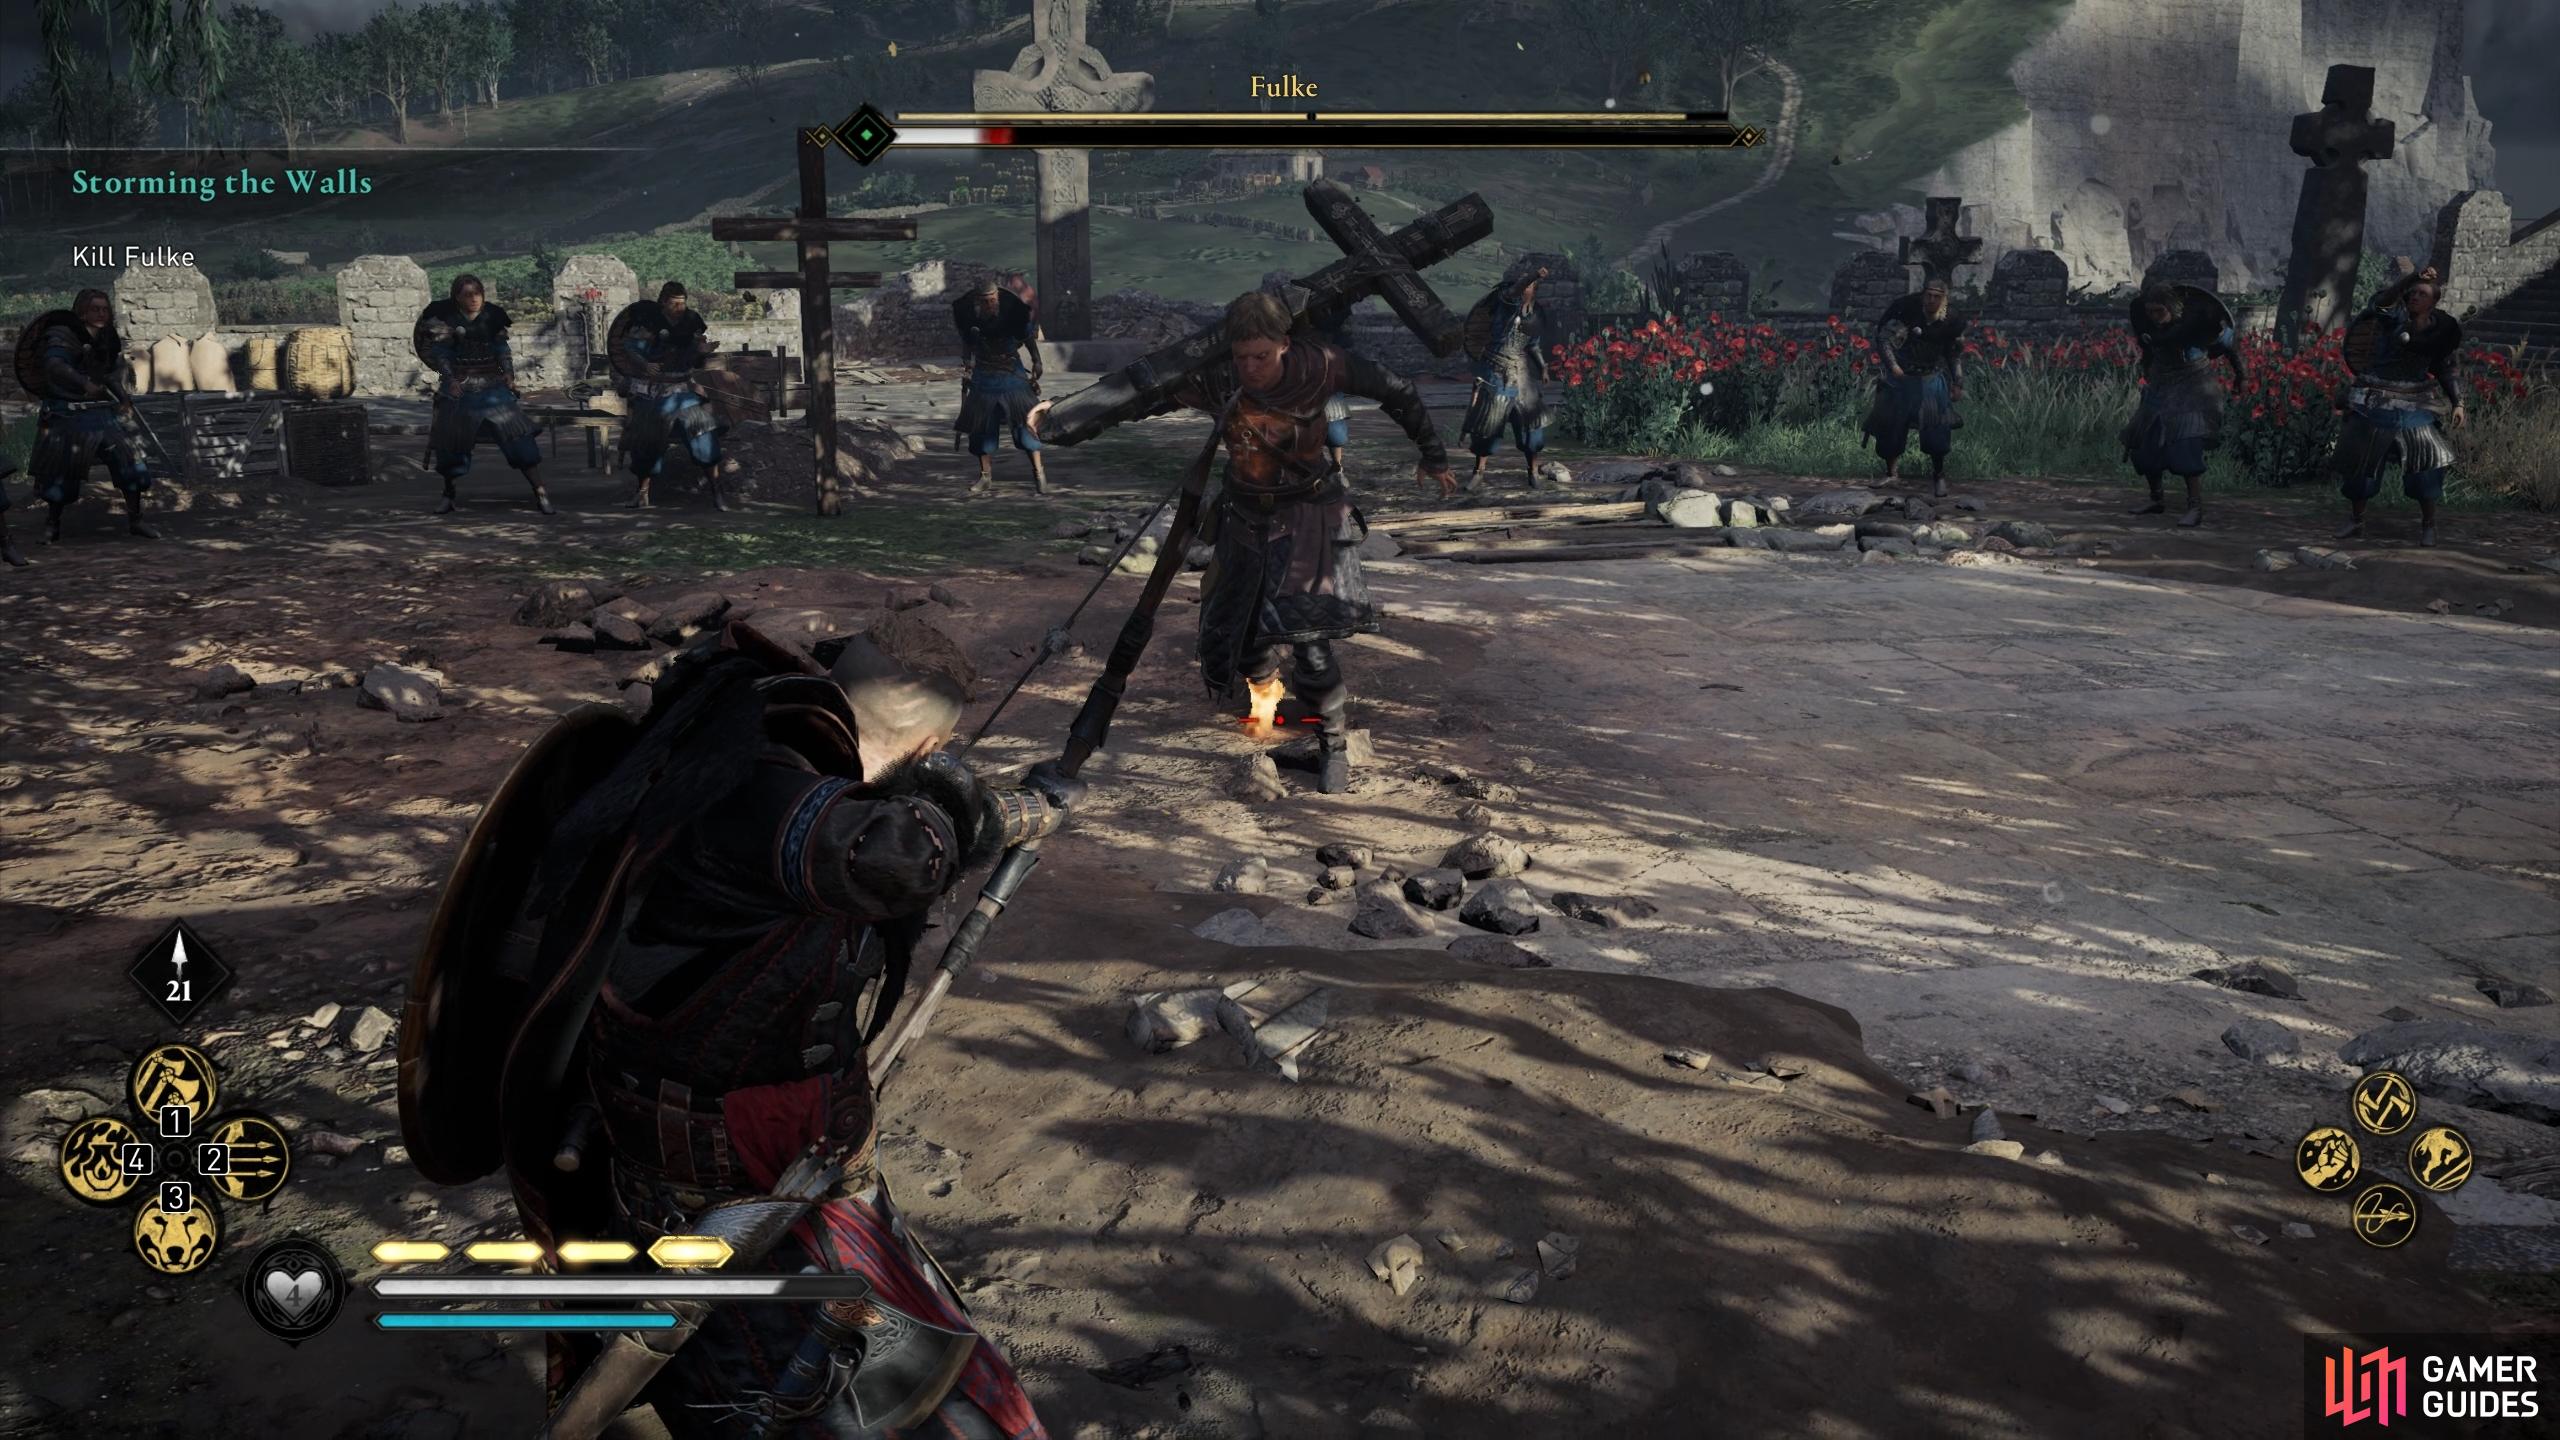 You can hit Fulke's weak points again during the second phase of the fight.